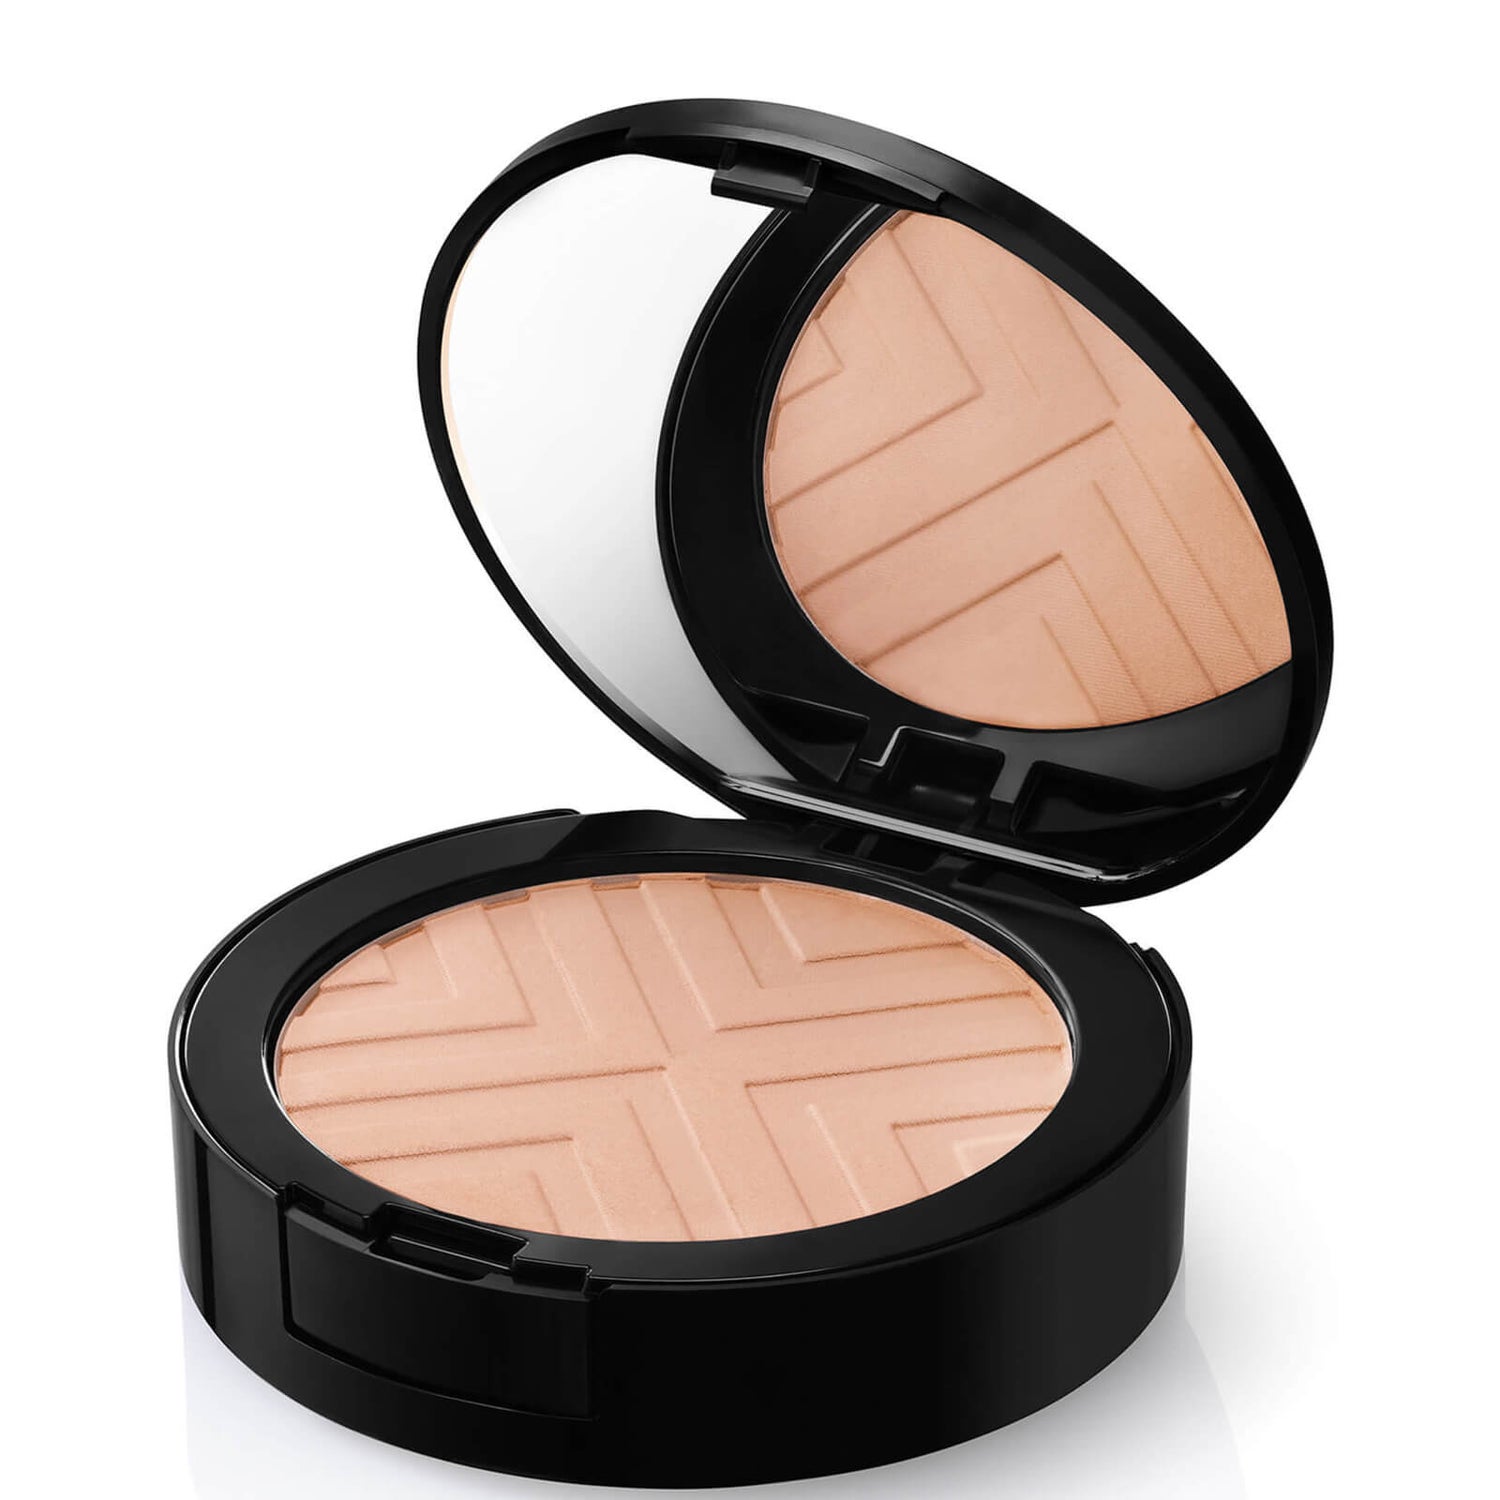 VICHY Dermablend Covermatte Compact Powder Foundation - 25